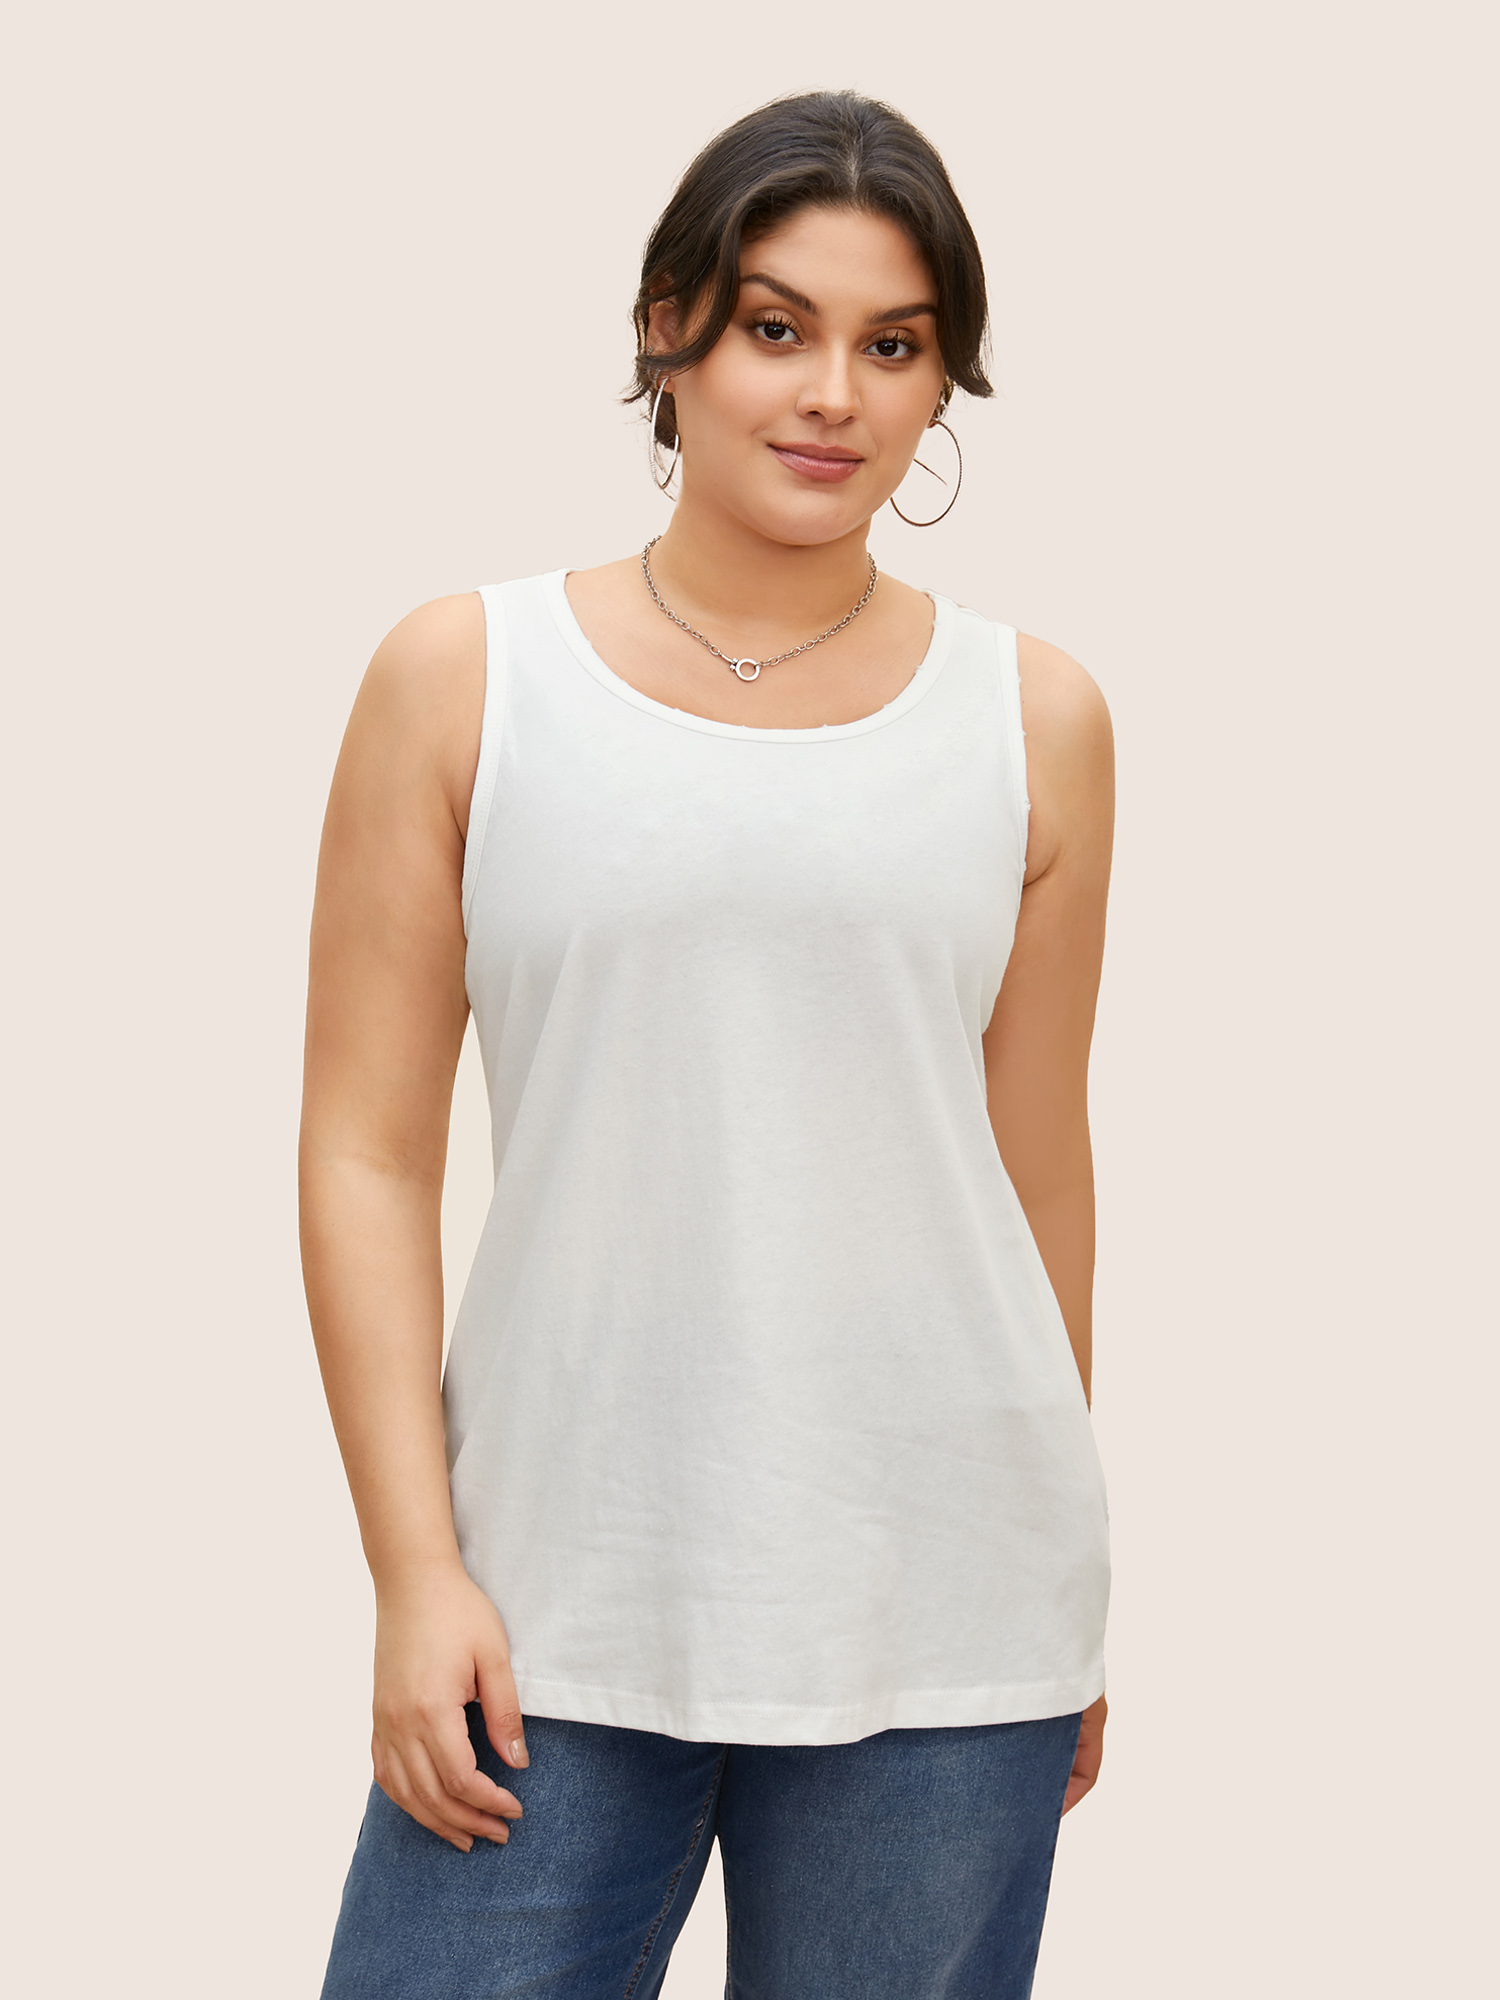 

Plus Size Cotton Round Neck Distressed Stretched Tank Top Women WhiteSmoke Casual Distressed Round Neck Everyday Tank Tops Camis BloomChic